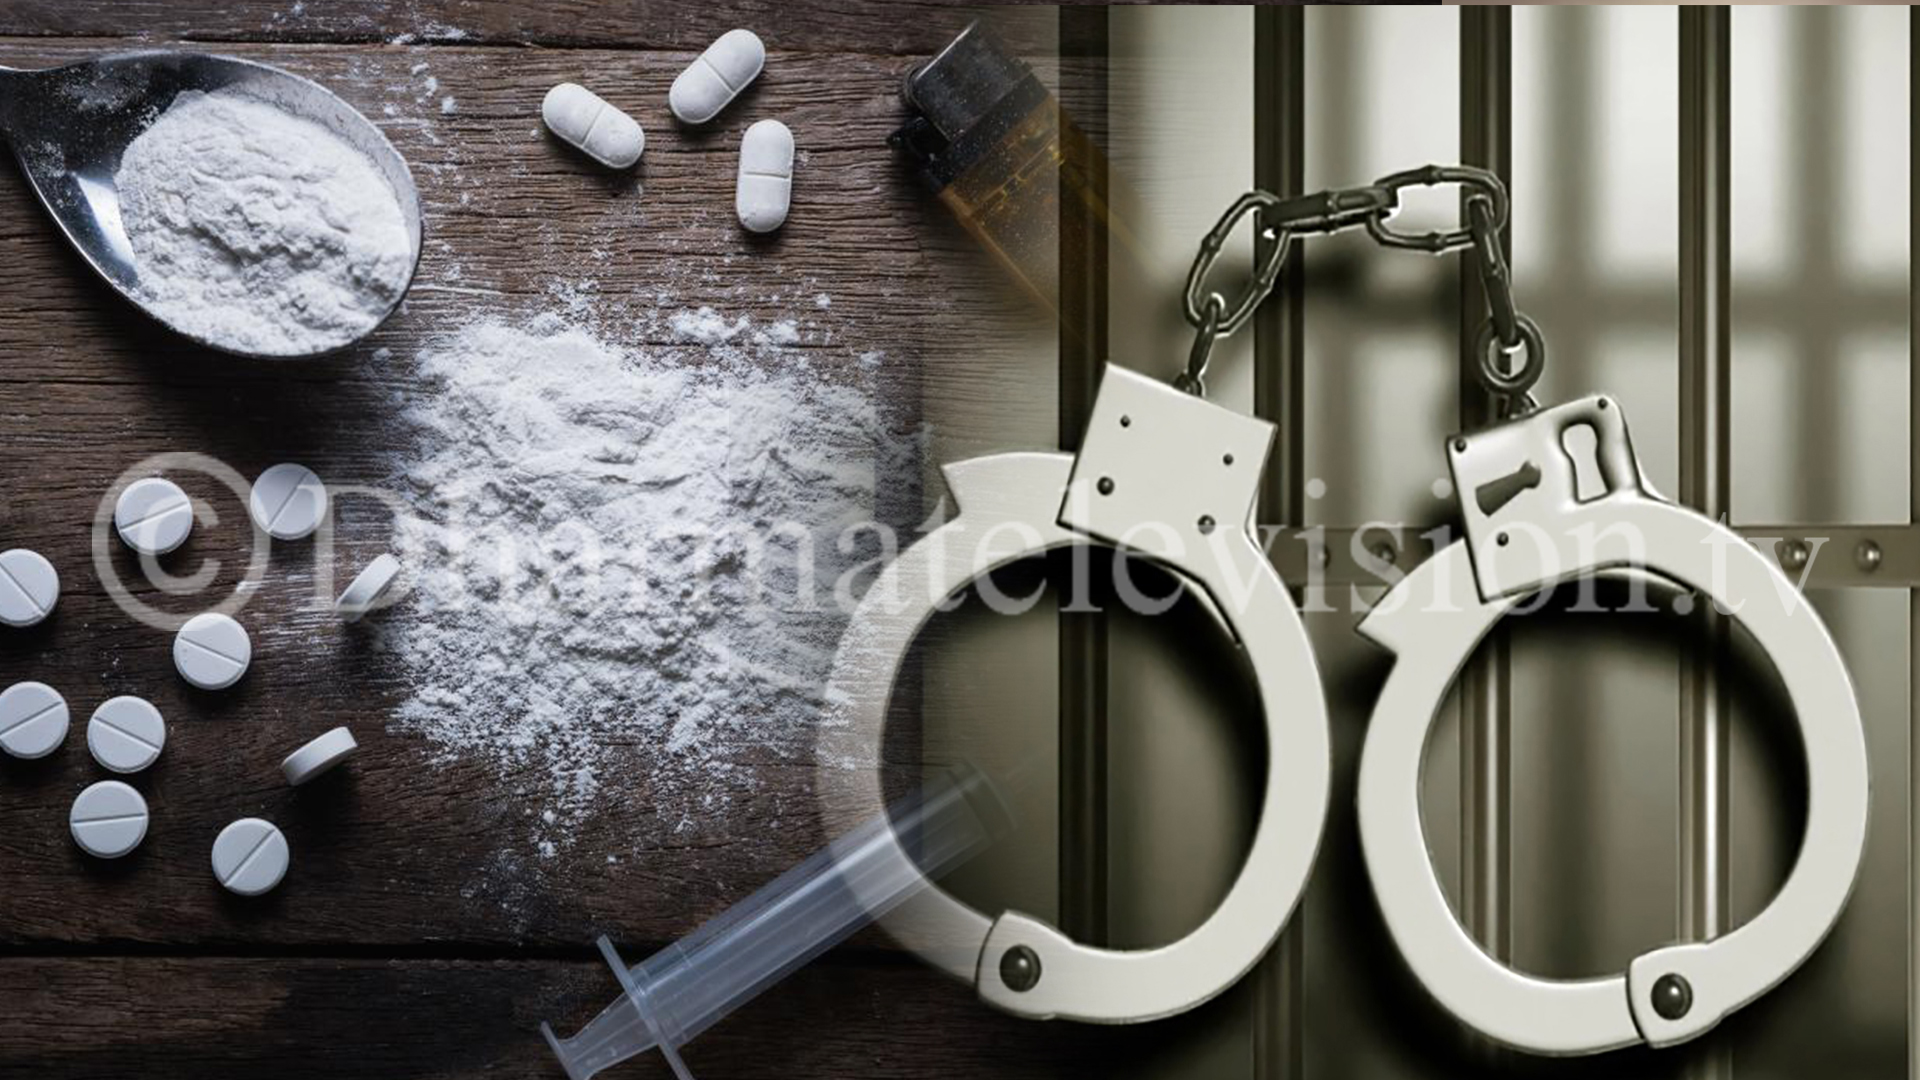 A Couple Arrested With Drugs in Jhapa